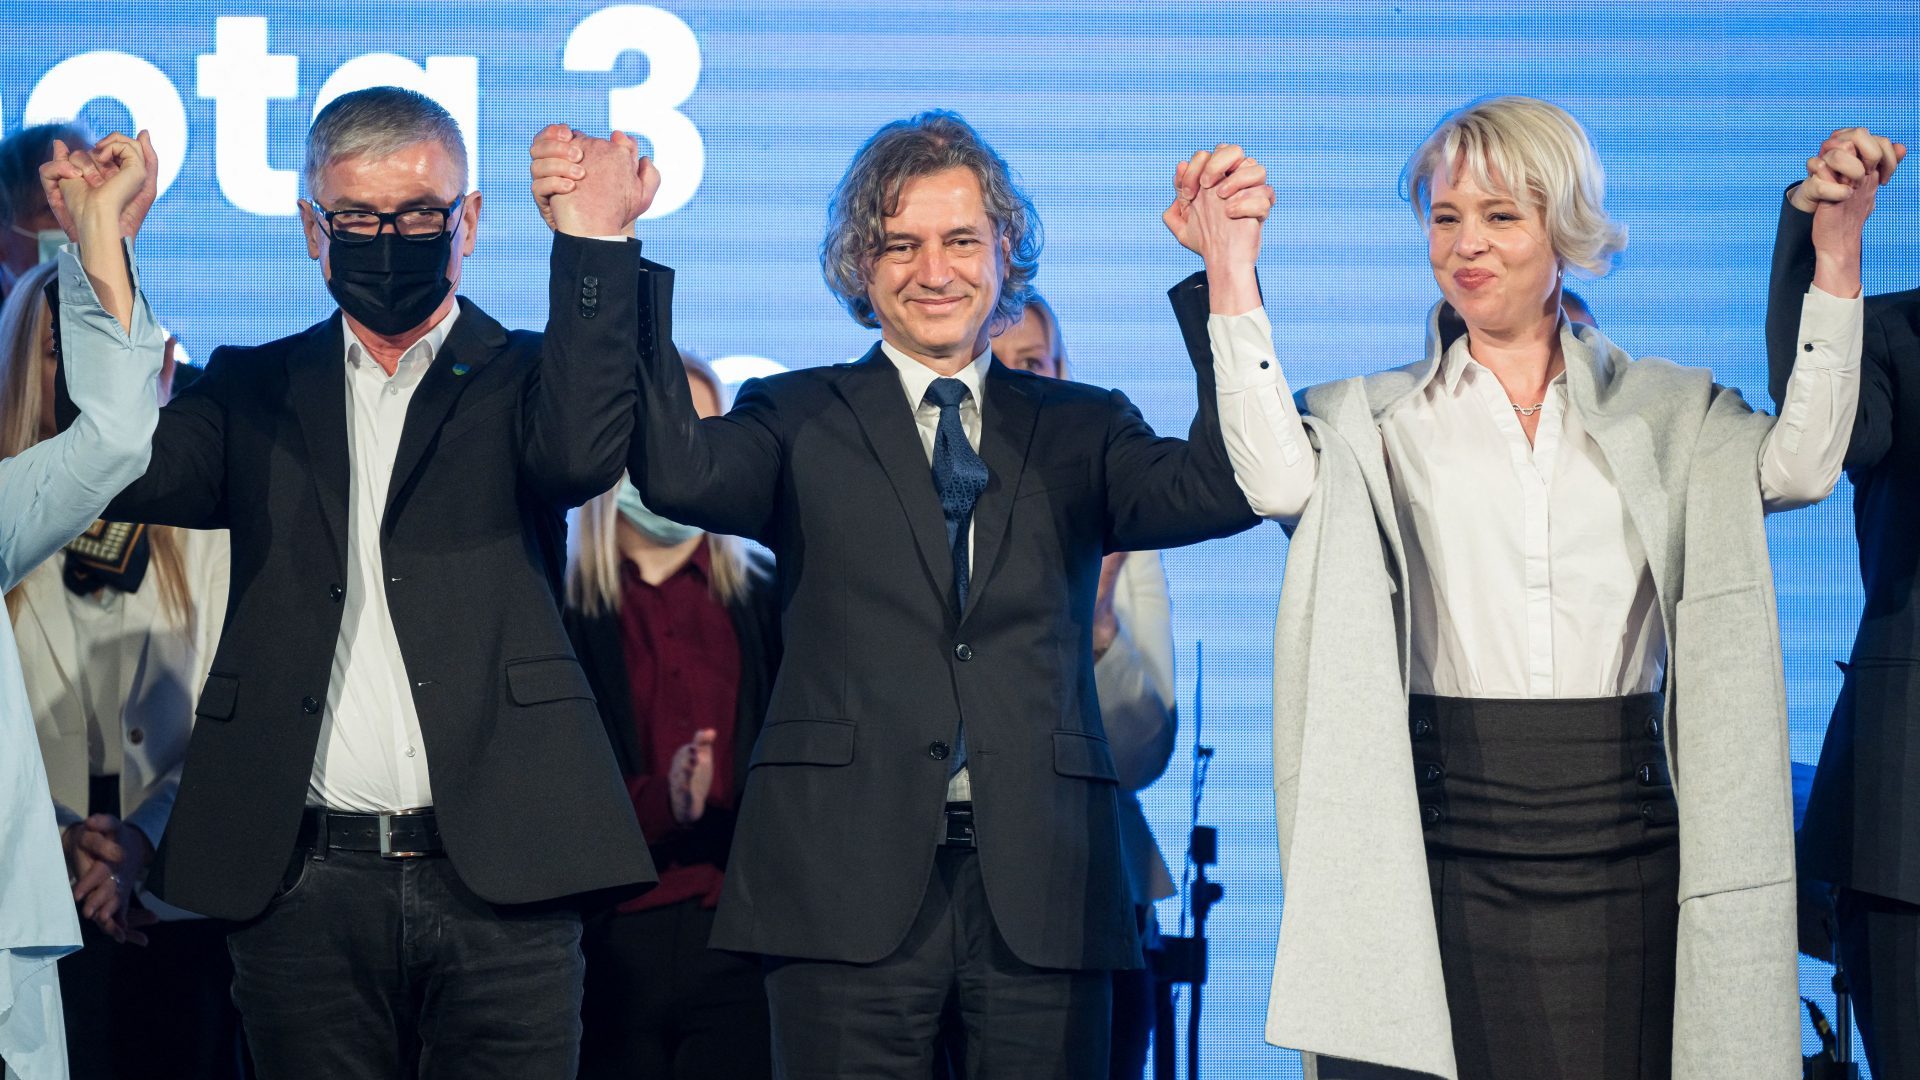 Robert Golob, leader of the newly founded liberal Freedom Movement party, during the pre-election convention in Ljubljana on 19 March. His party won a landslide victory in Slovenia’s elections. Photo: Jure Makovec/AFP/Getty Images